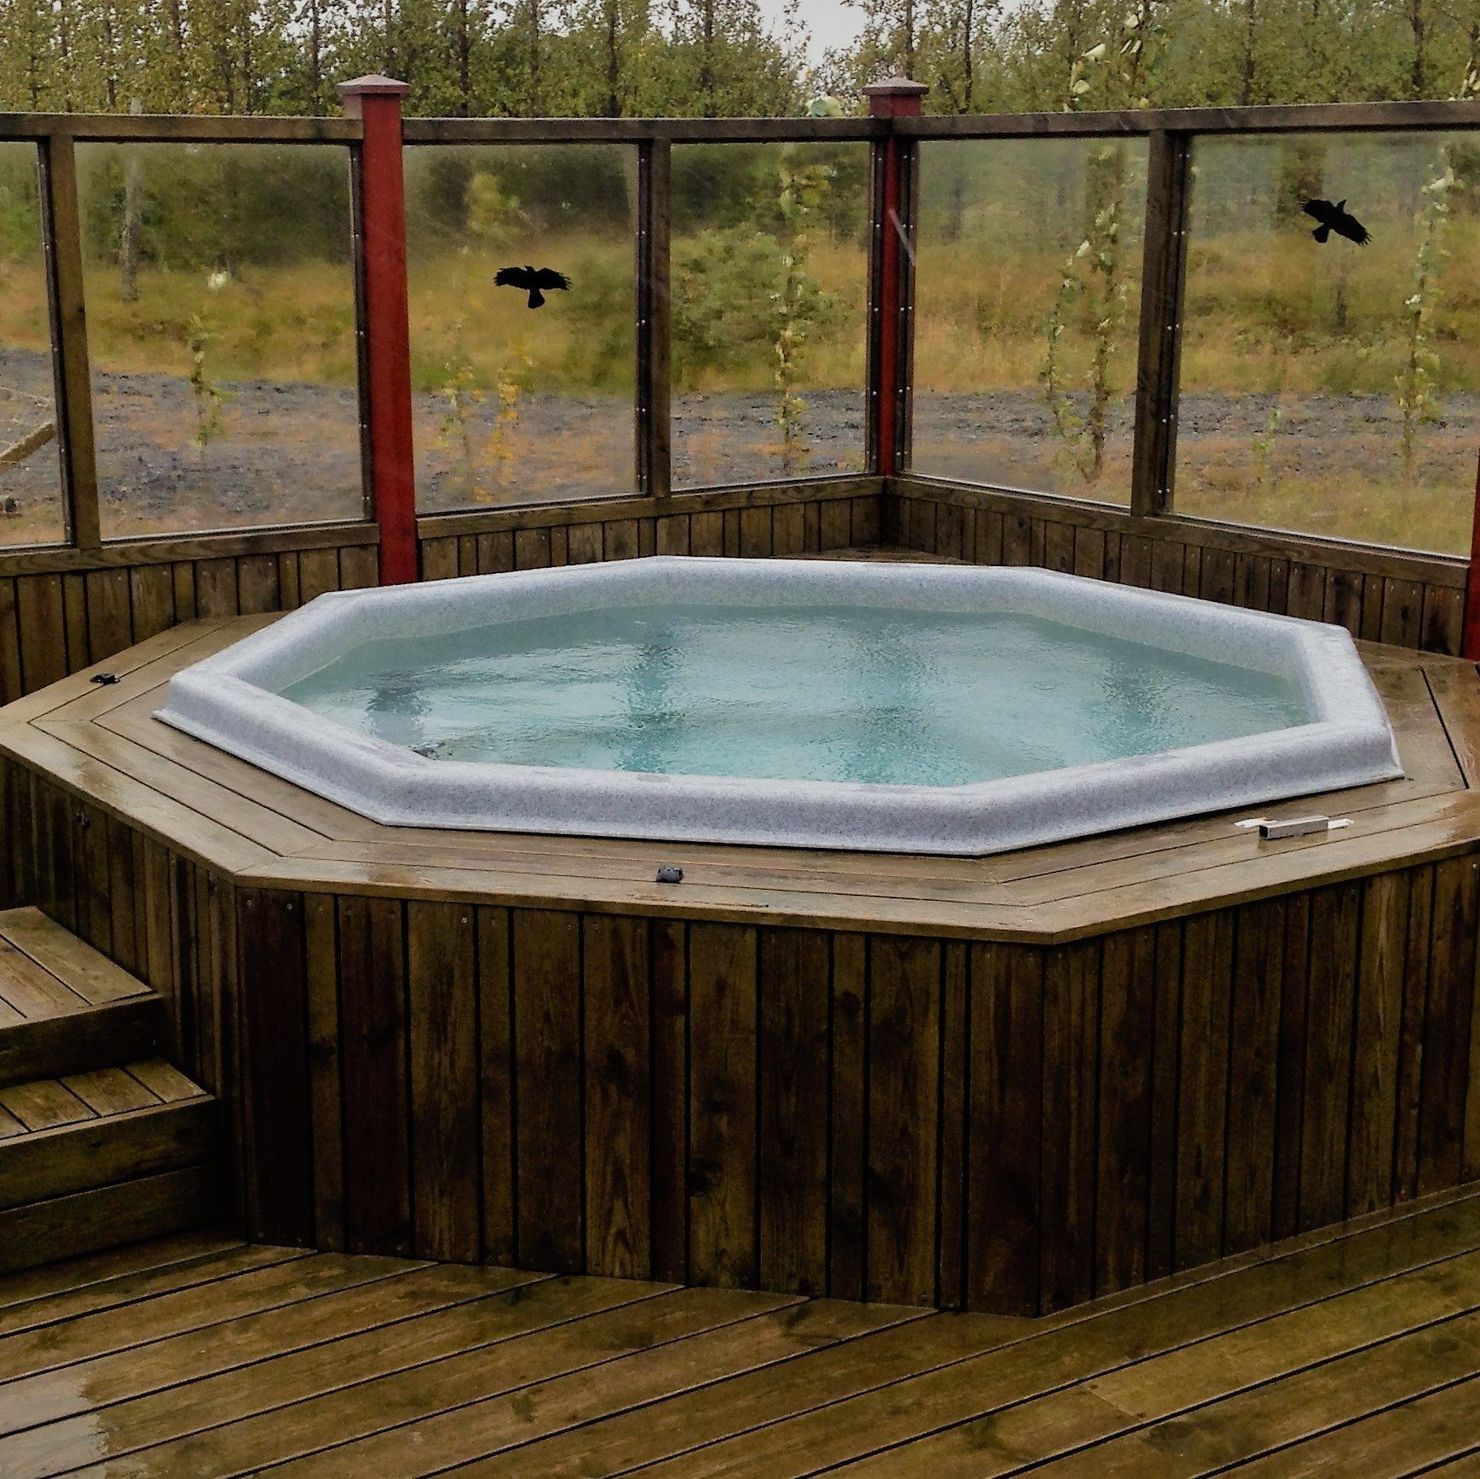 Lovely hot tub out side